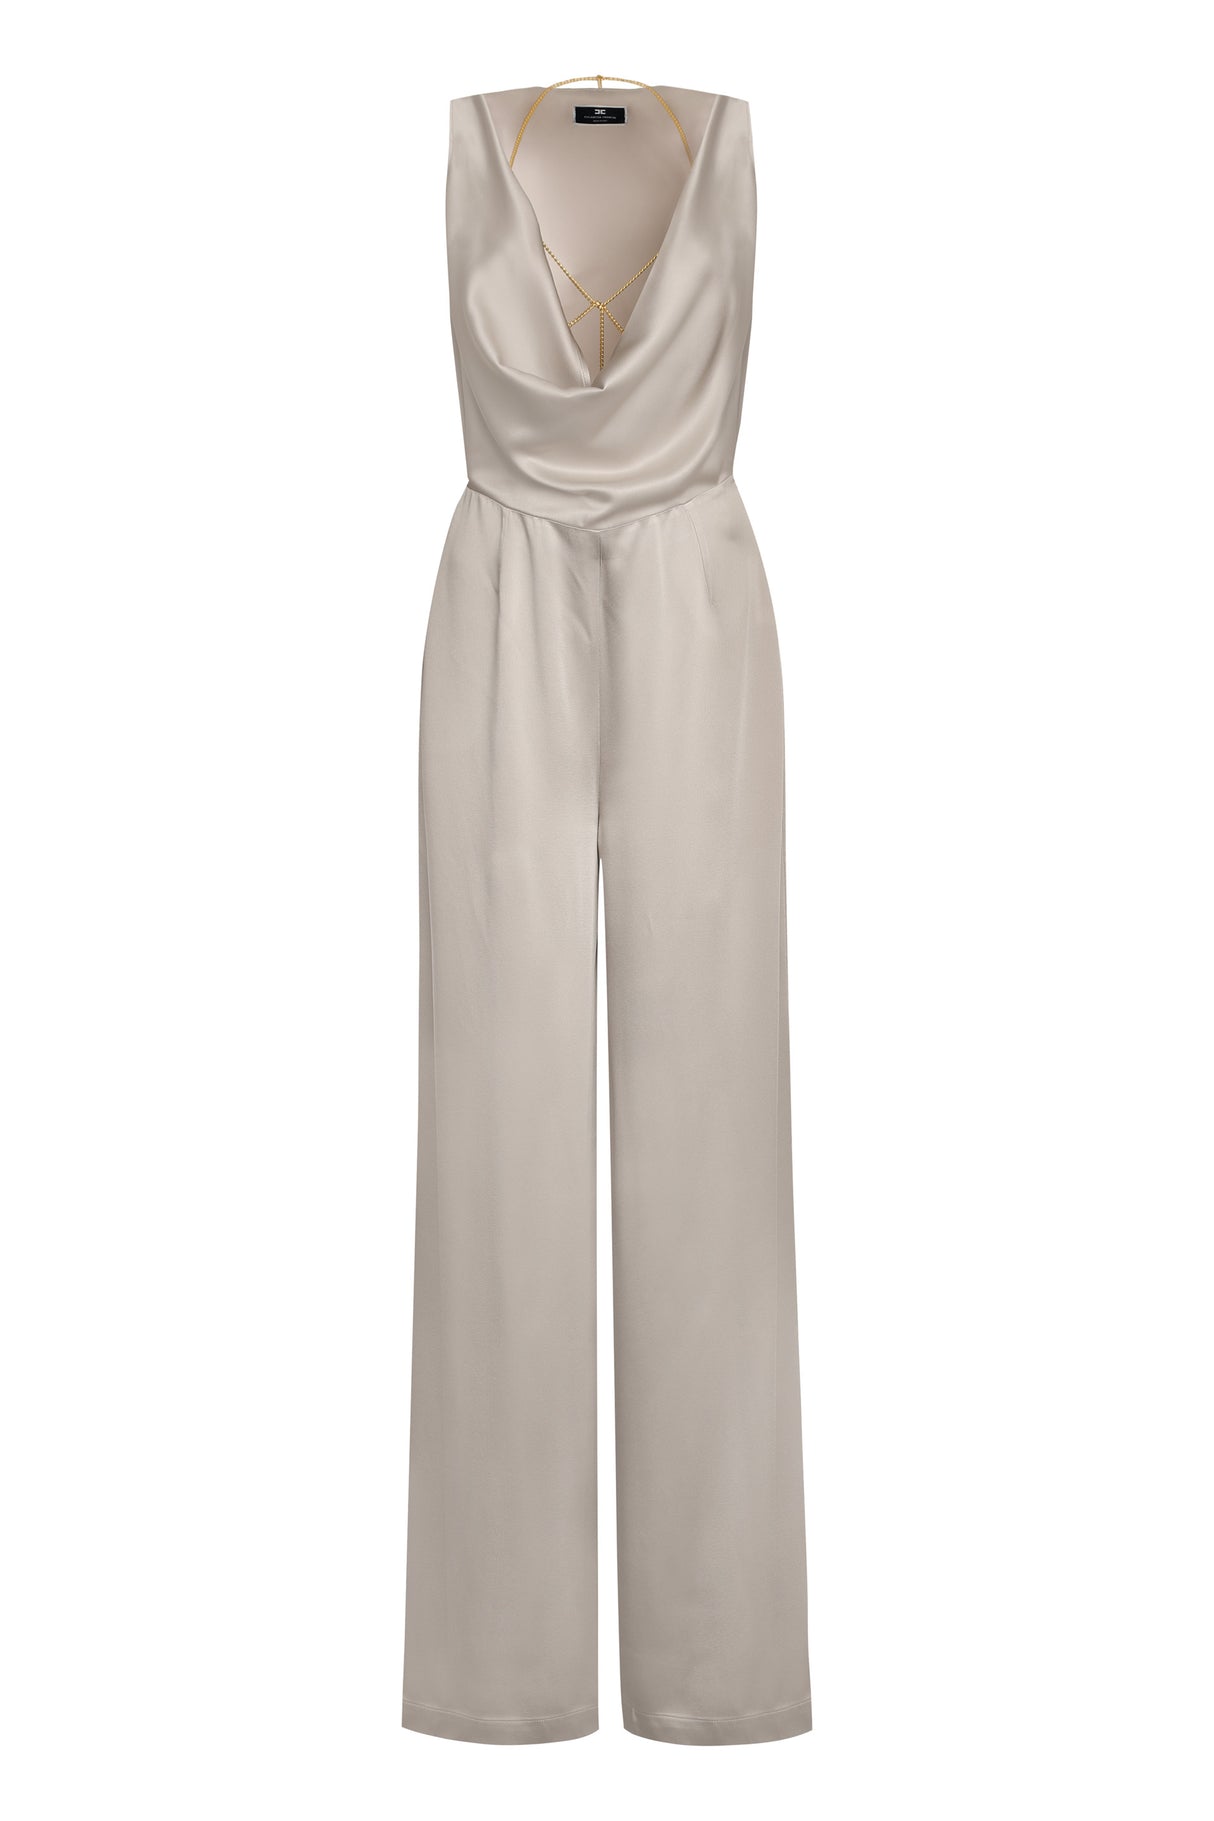 Pearl Sleeveless Jumpsuit with Gold Bra Accessory